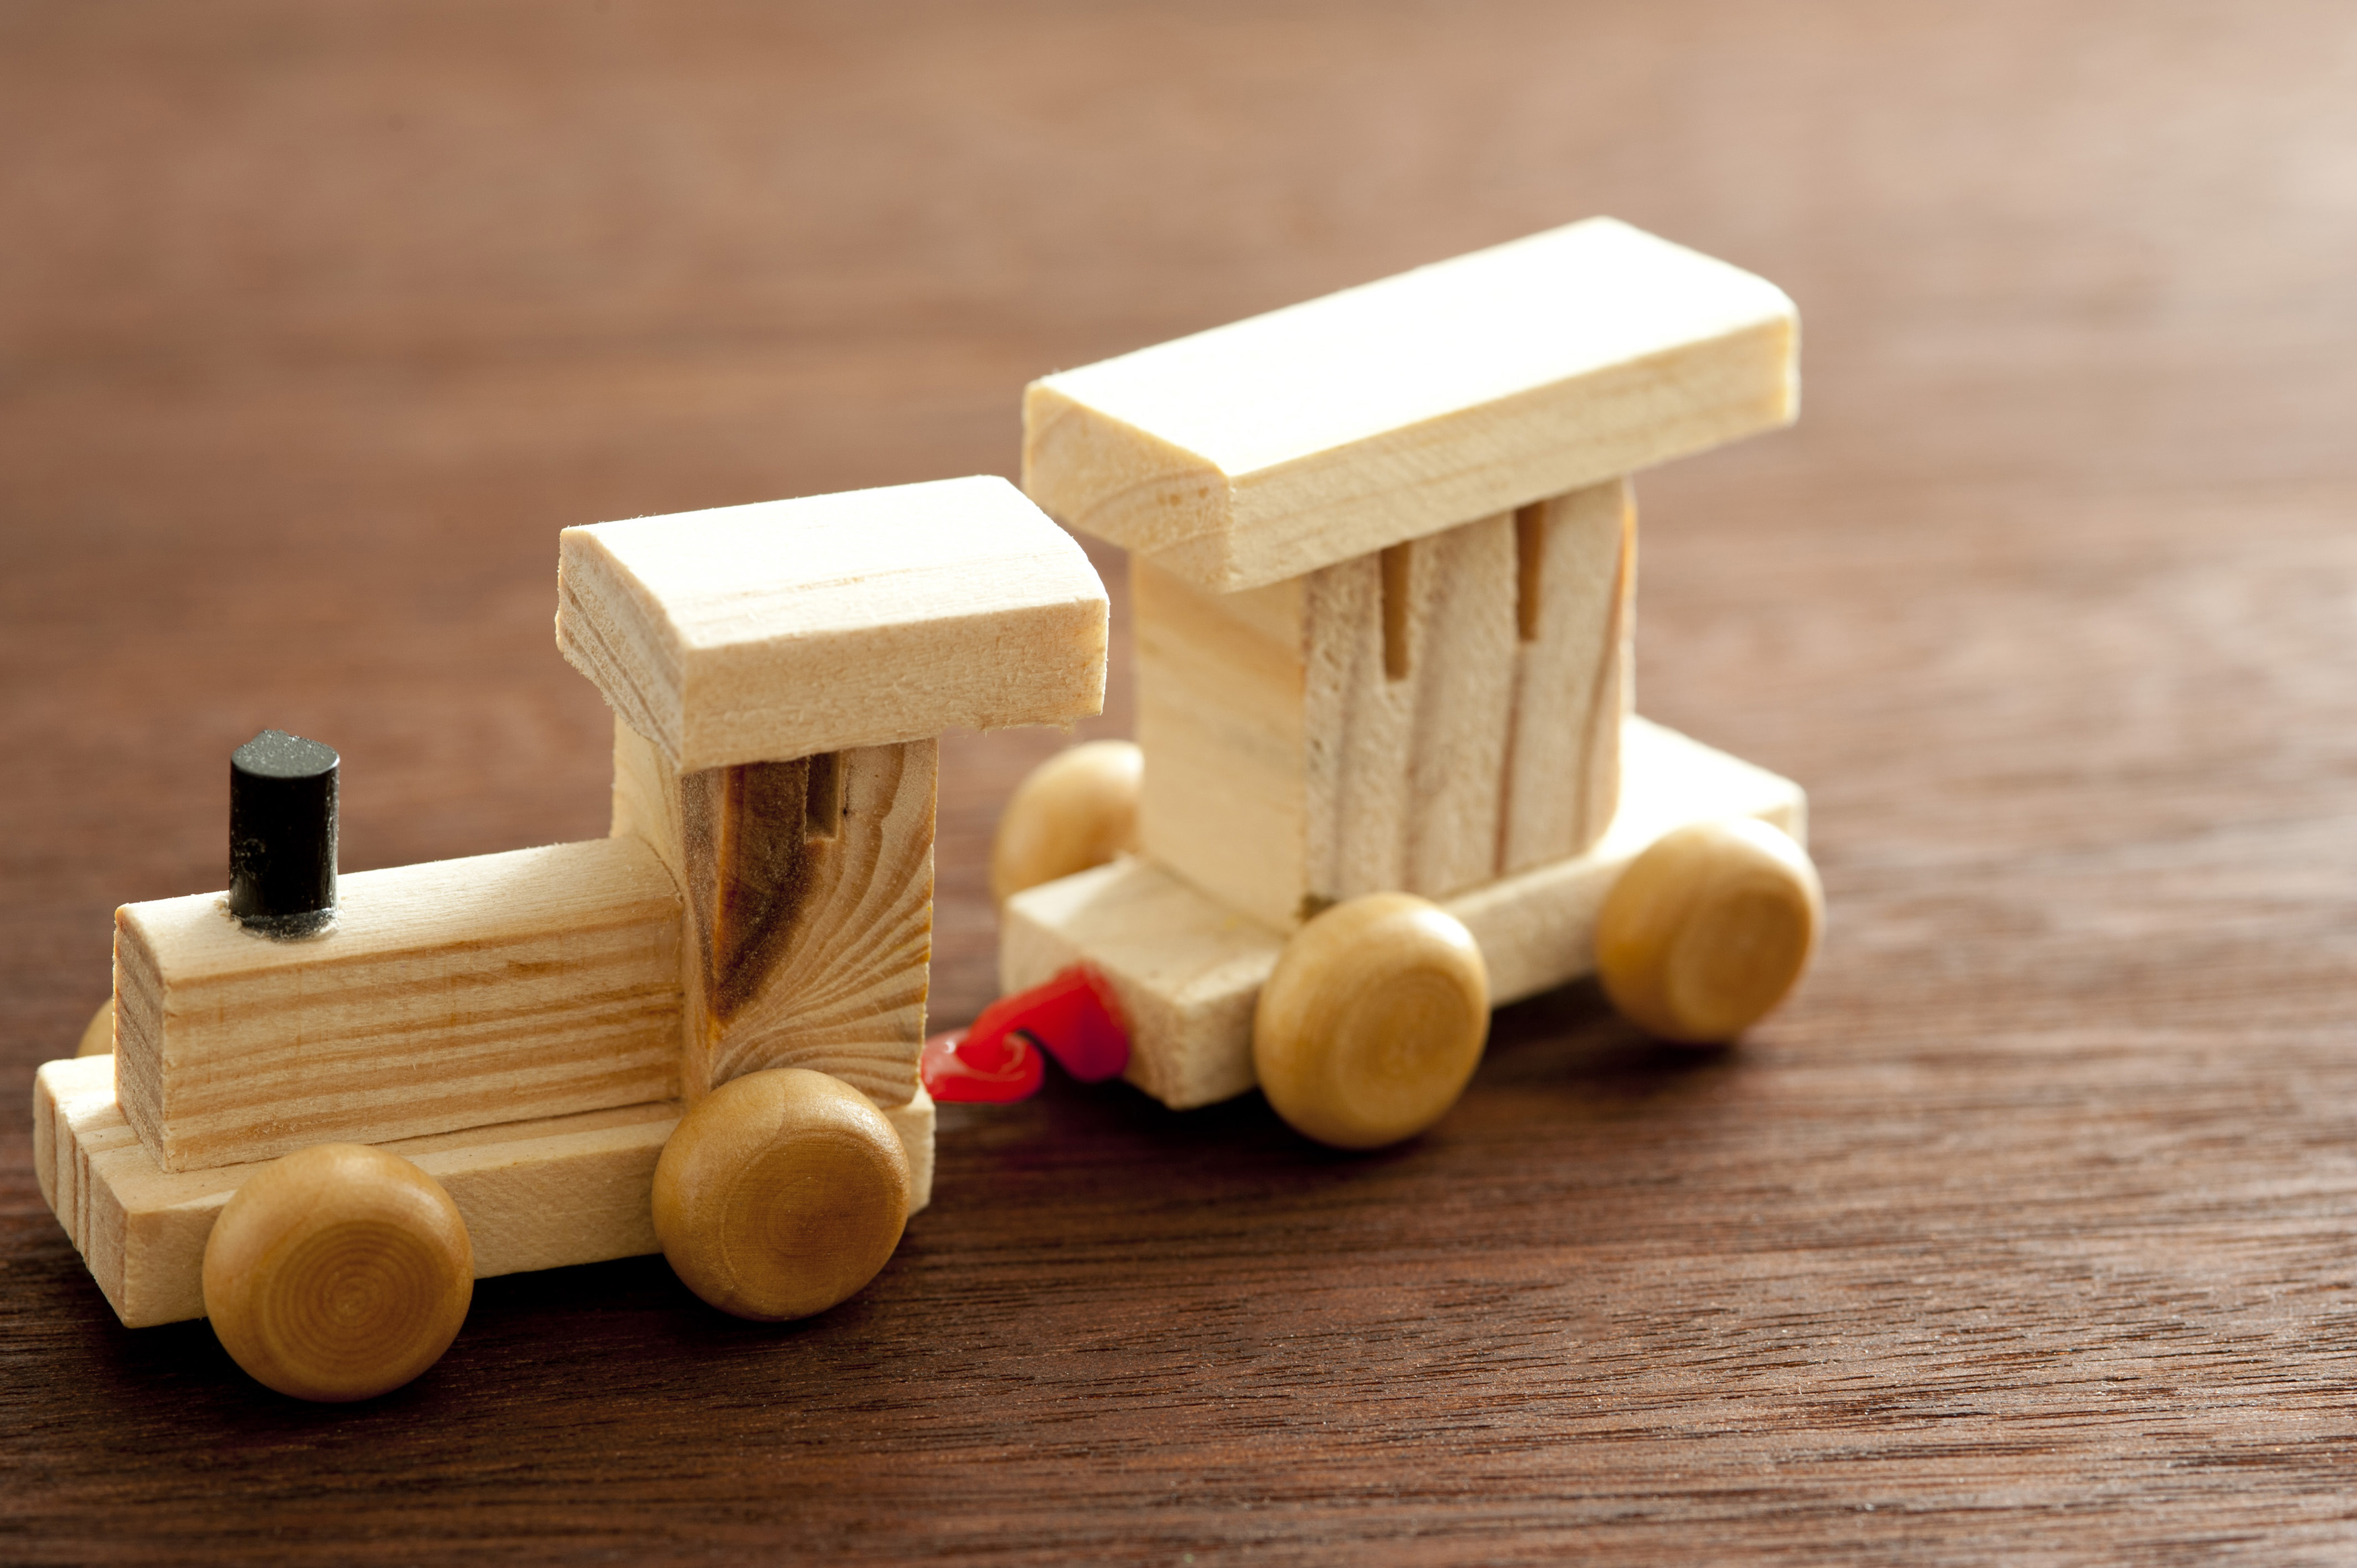 Free Stock Photo 11986 Wooden Train and Caboose Car on Wood Surface 